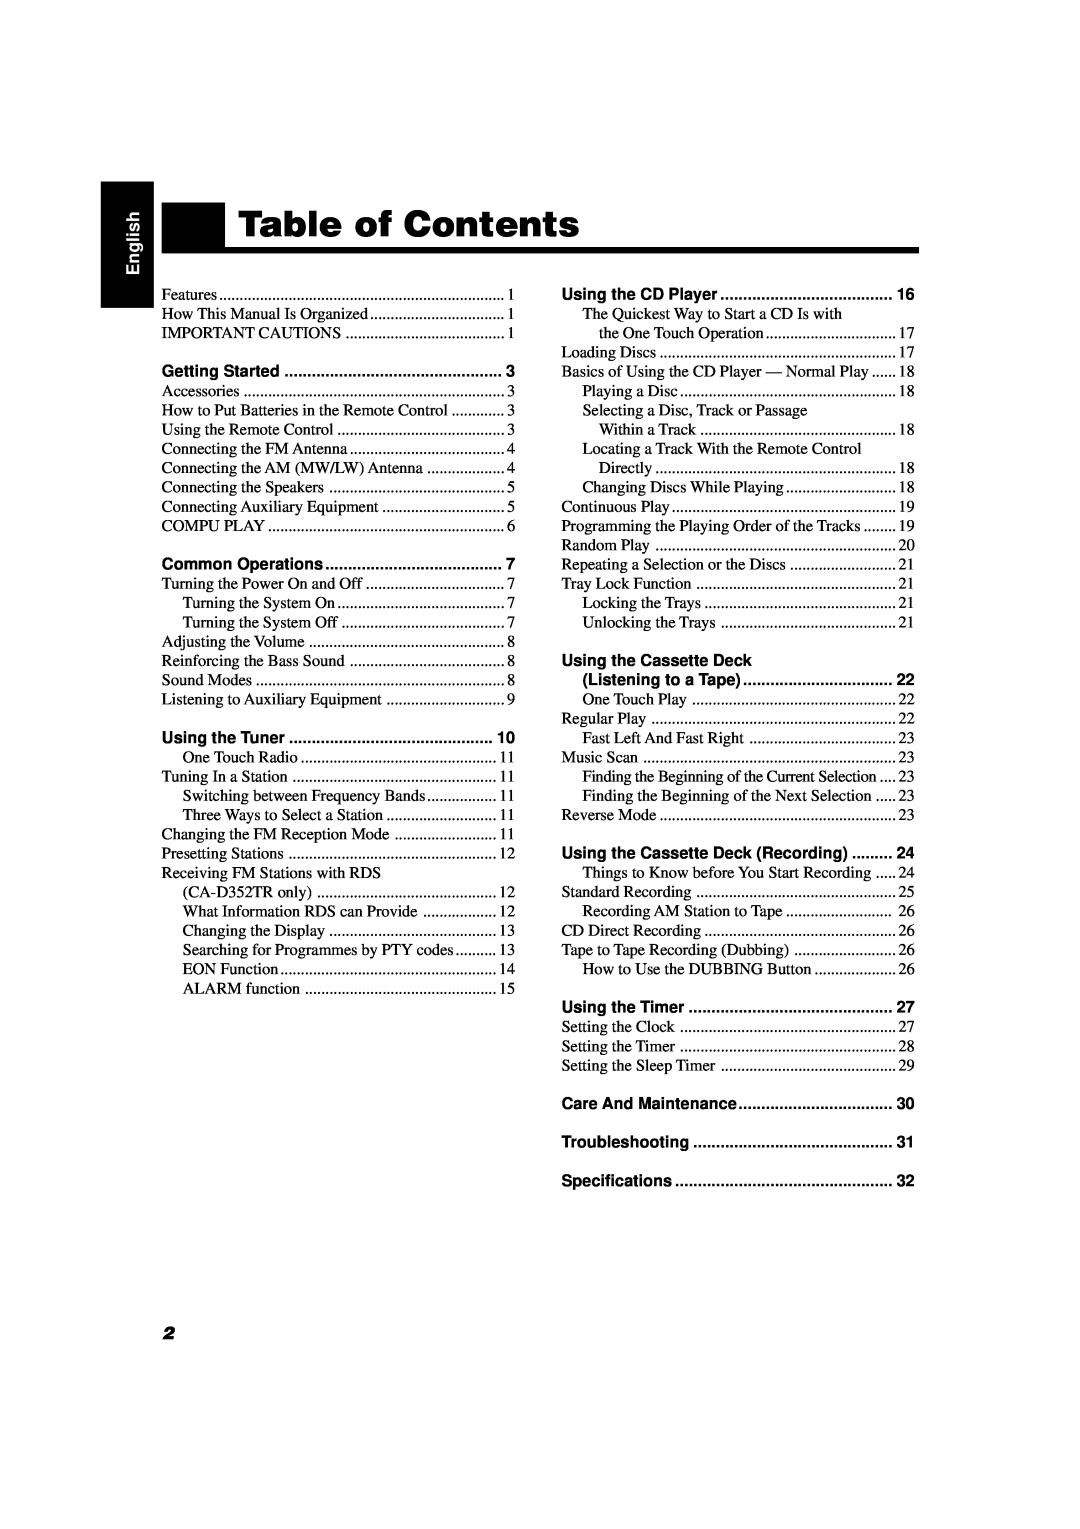 JVC CA-D352TR, CA-D302T manual Table of Contents, Using the Cassette Deck, Using the Tuner, English 